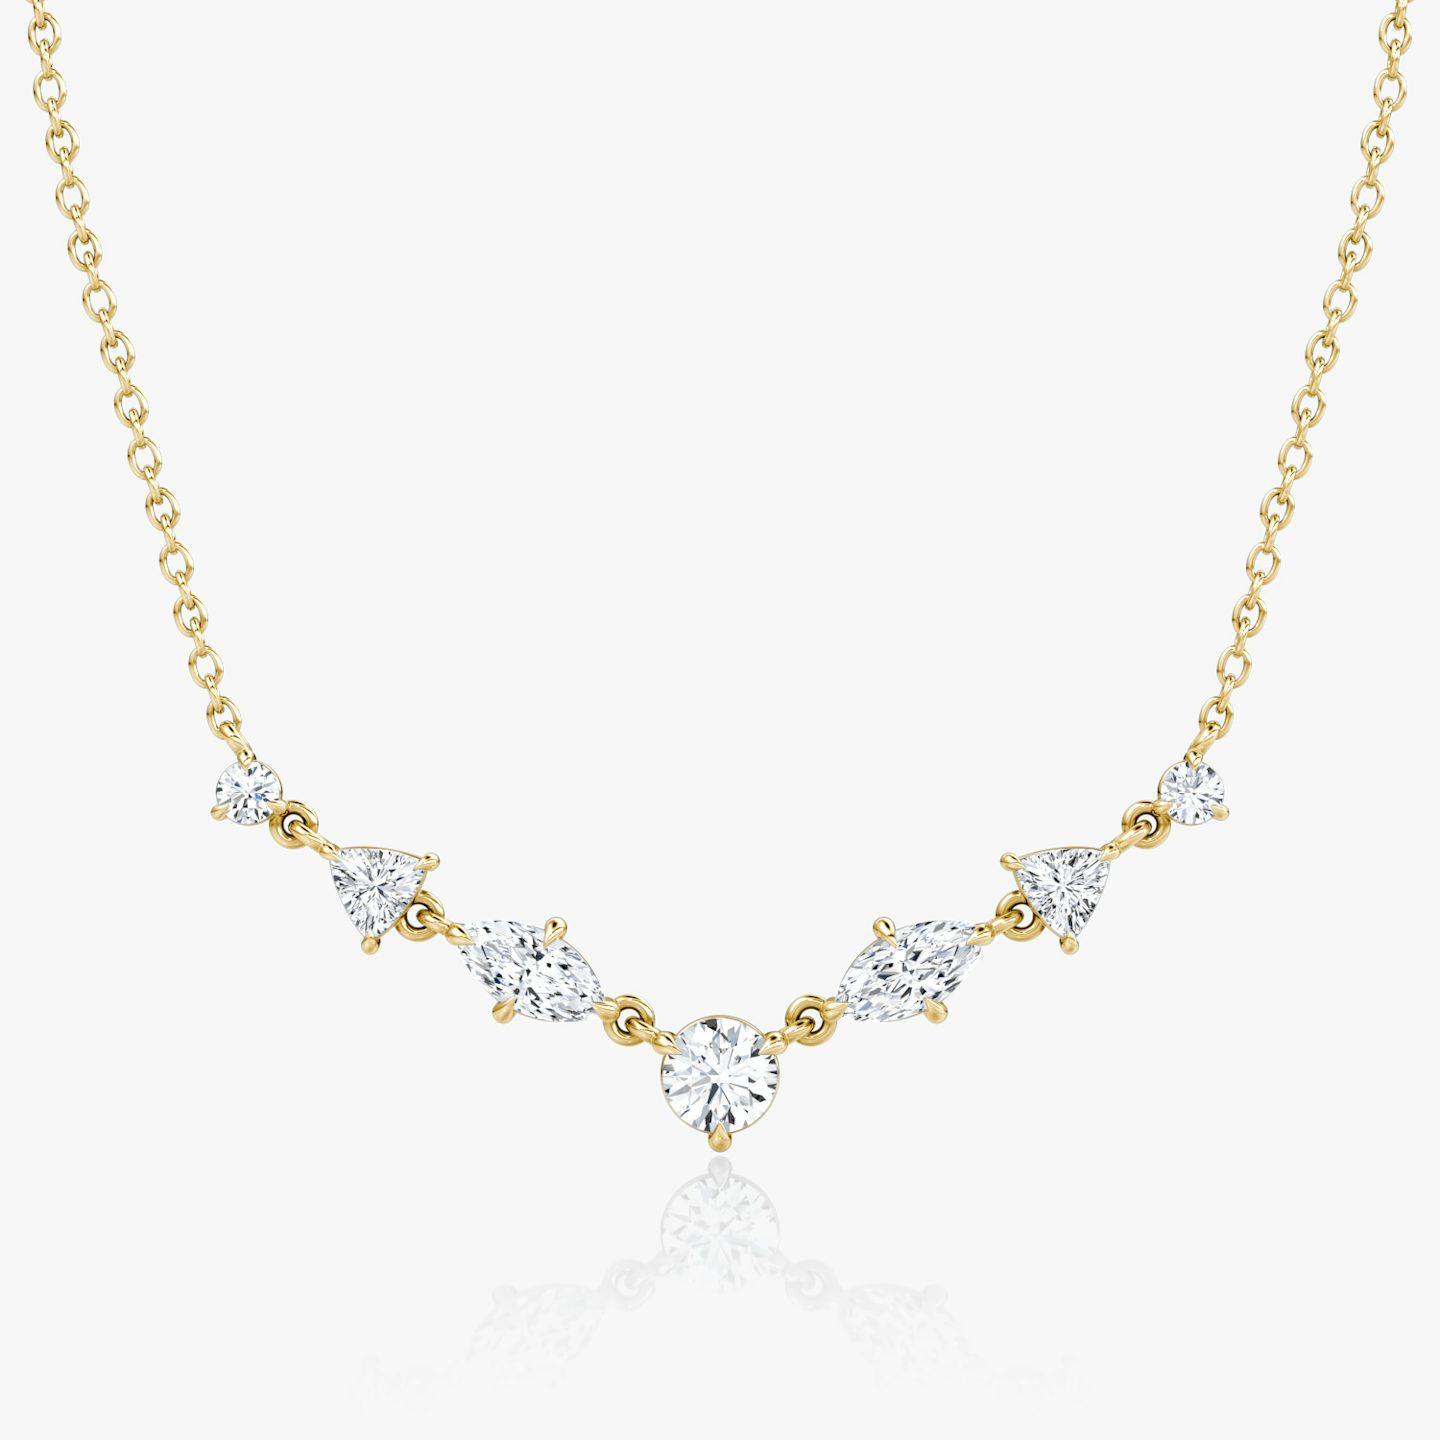 Mixed Shape Linked Tennis Necklace | 14k | Yellow Gold | diamondtype: round-brilliant+marquise+trillion | chainLength: 16-18